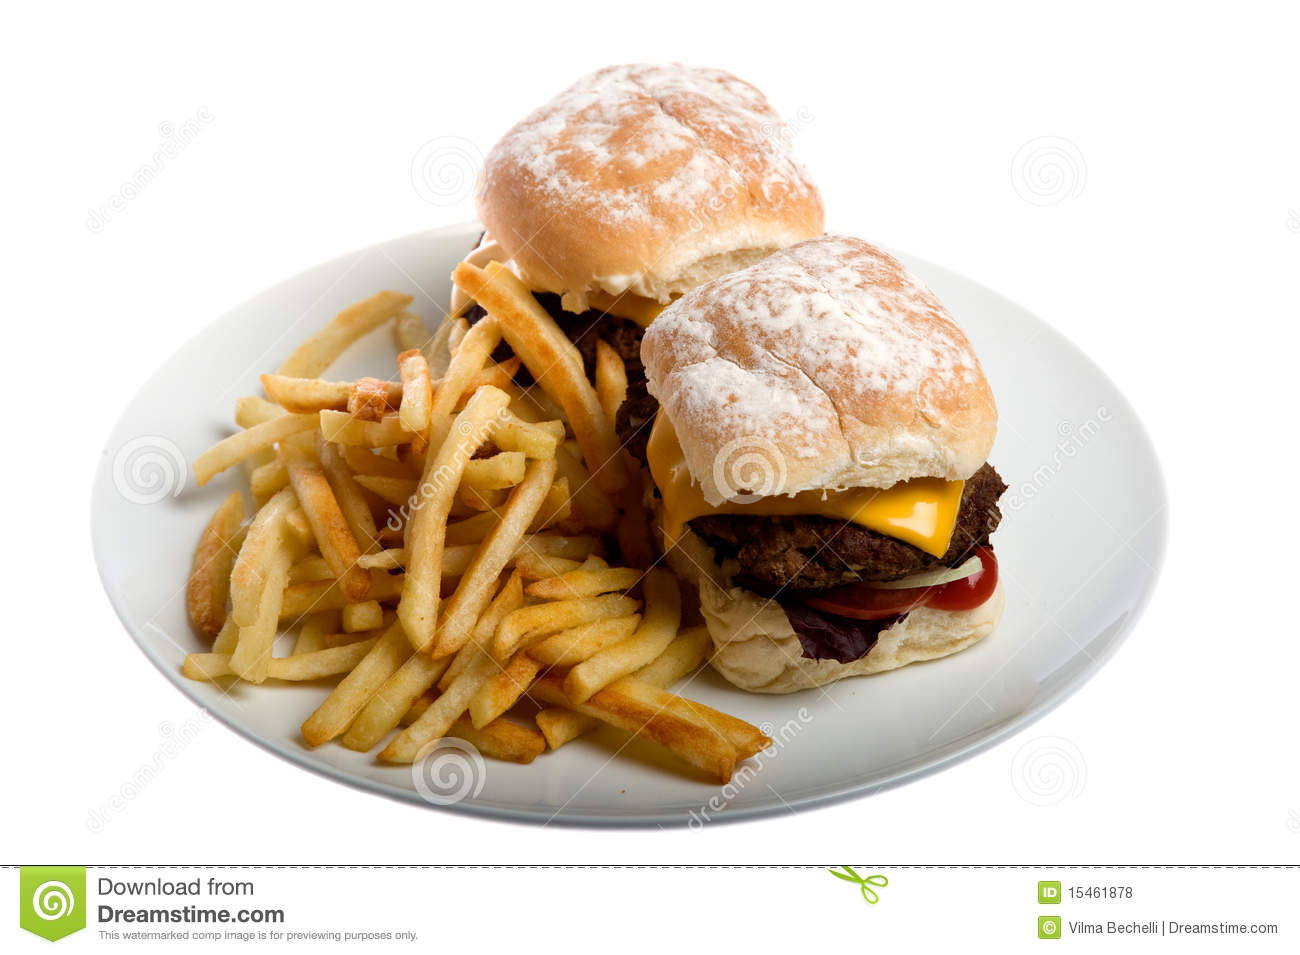 Burger And Chips Royalty Free Stock Photos   Image  15461878